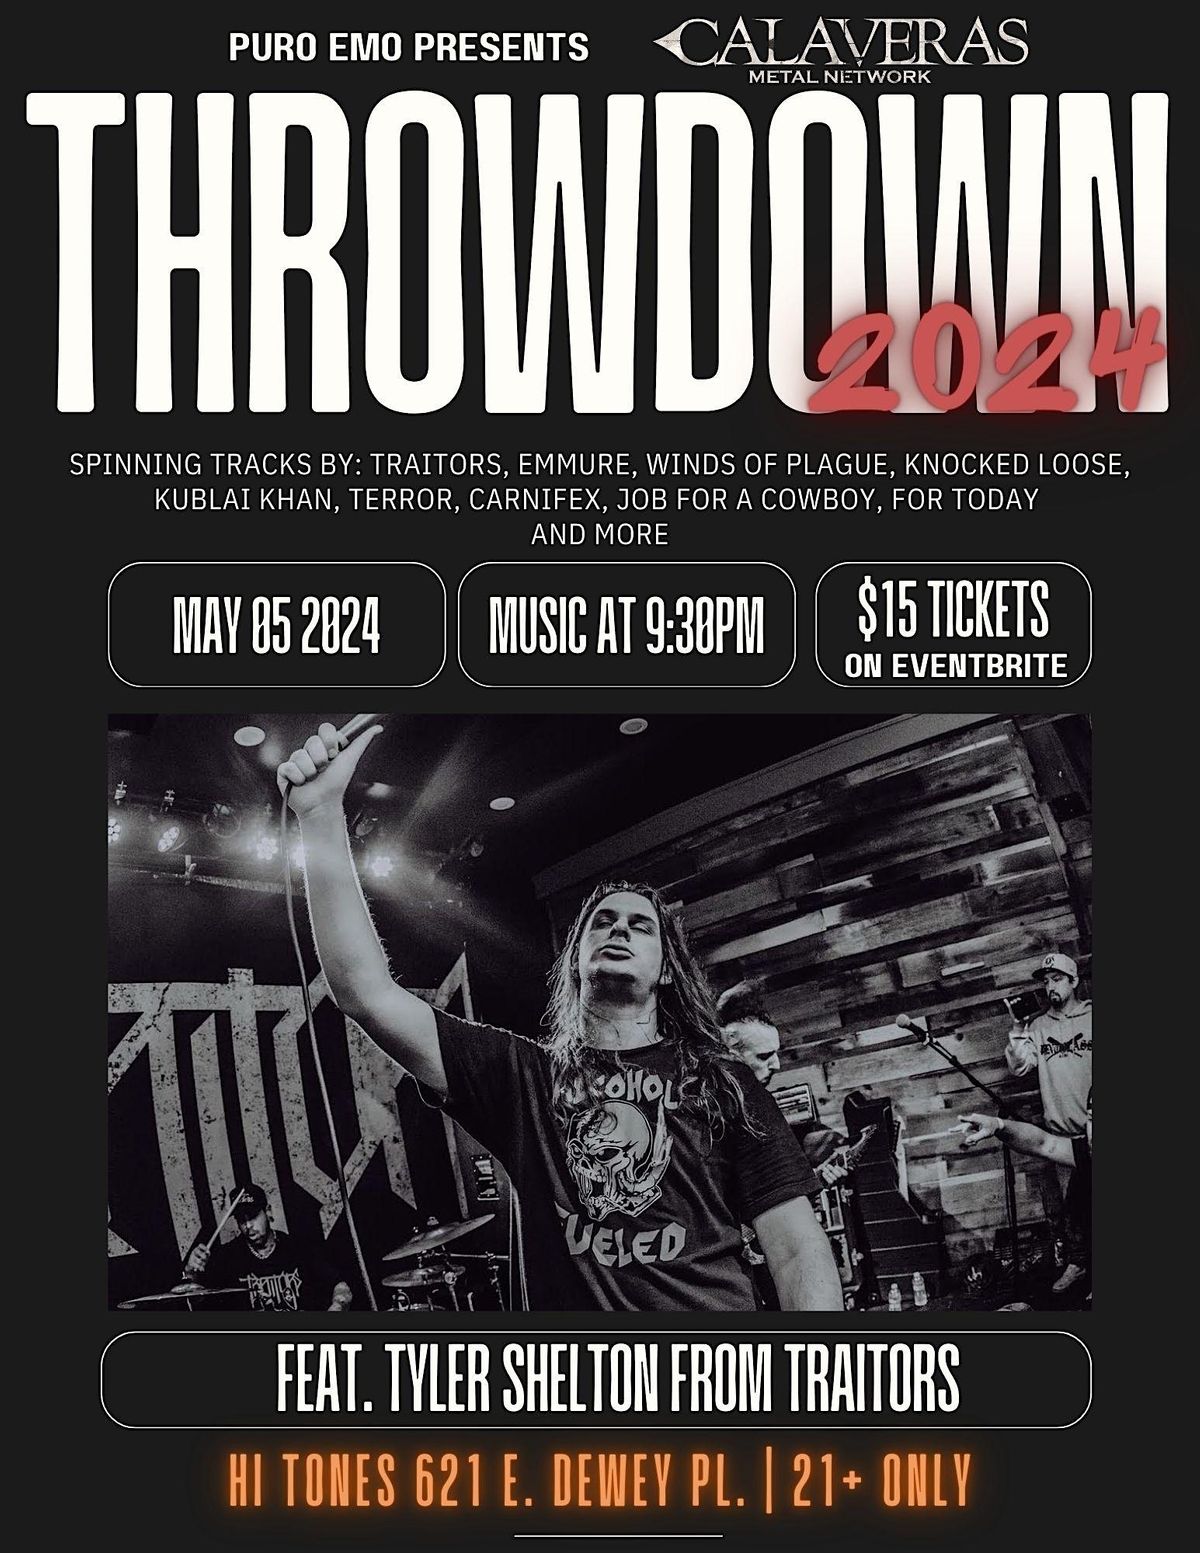 Puro Emo Presents: Throwdown 2024 with Tyler Shelton from Traitors